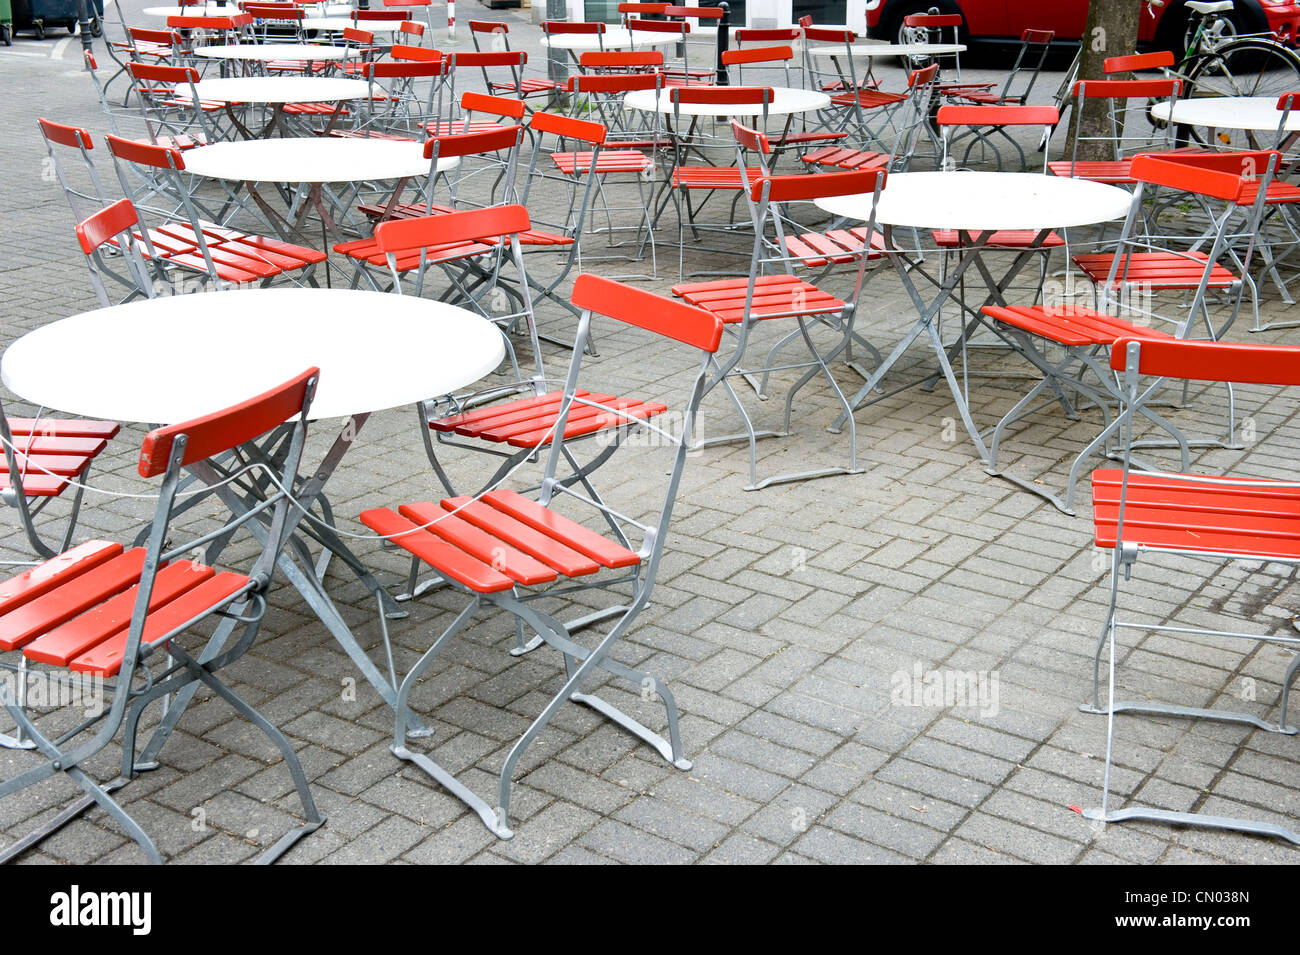 An empty cafe sidewalk sitting area with white tables and red chairs. Stock Photo